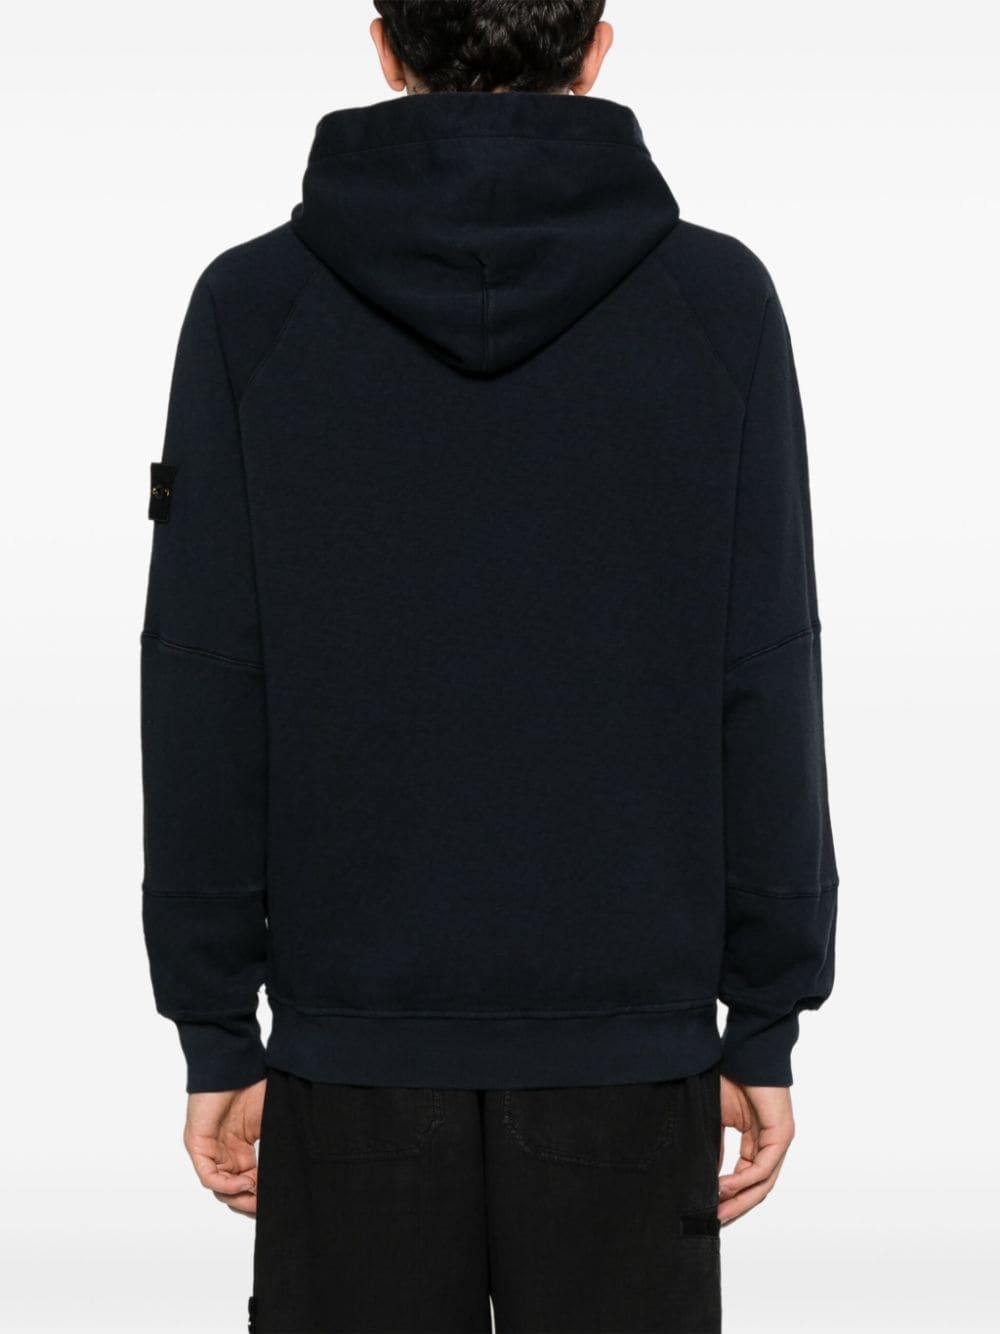 'Old' Treatment cotton hoodie<BR/><BR/><BR/>